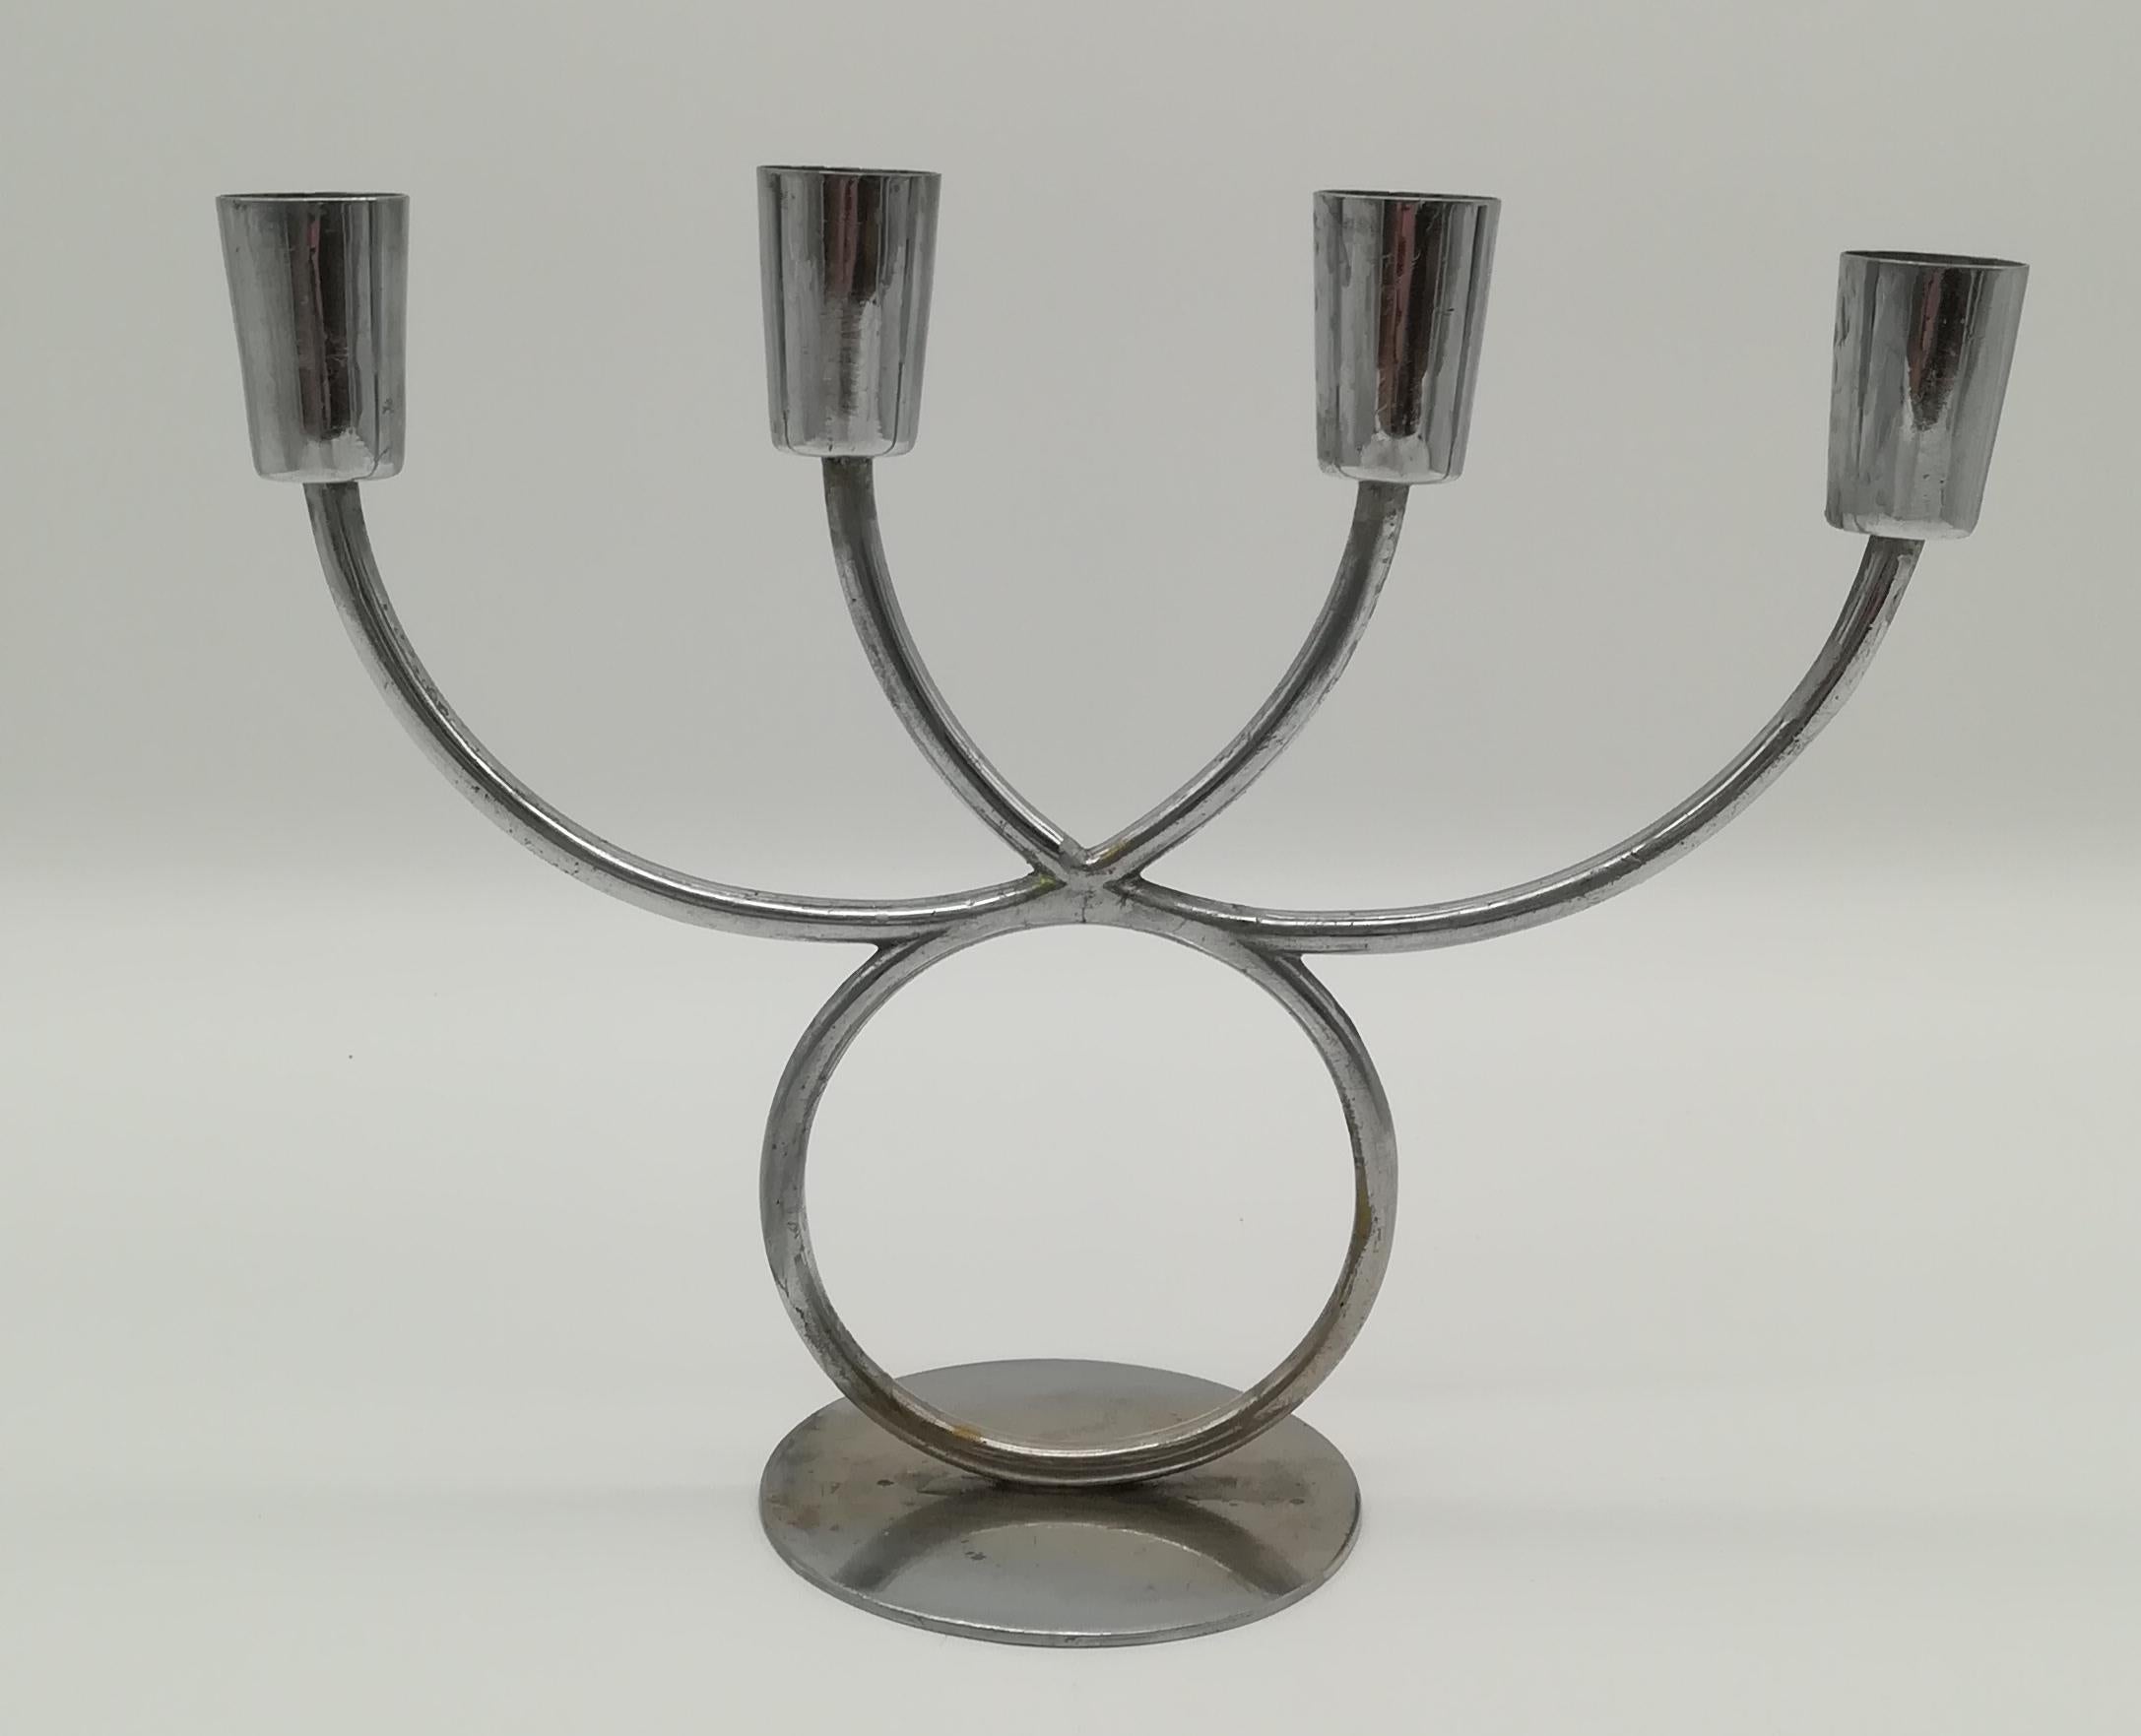 This thin, delicate nickle-plated brass candle holder dates from the late 1930's to the 1950's and thus elegantly shows the marriage of Mid-Century and Art-Deco forms. It is attributed to Karl Hagenauer, who was one of the most successful Austrian